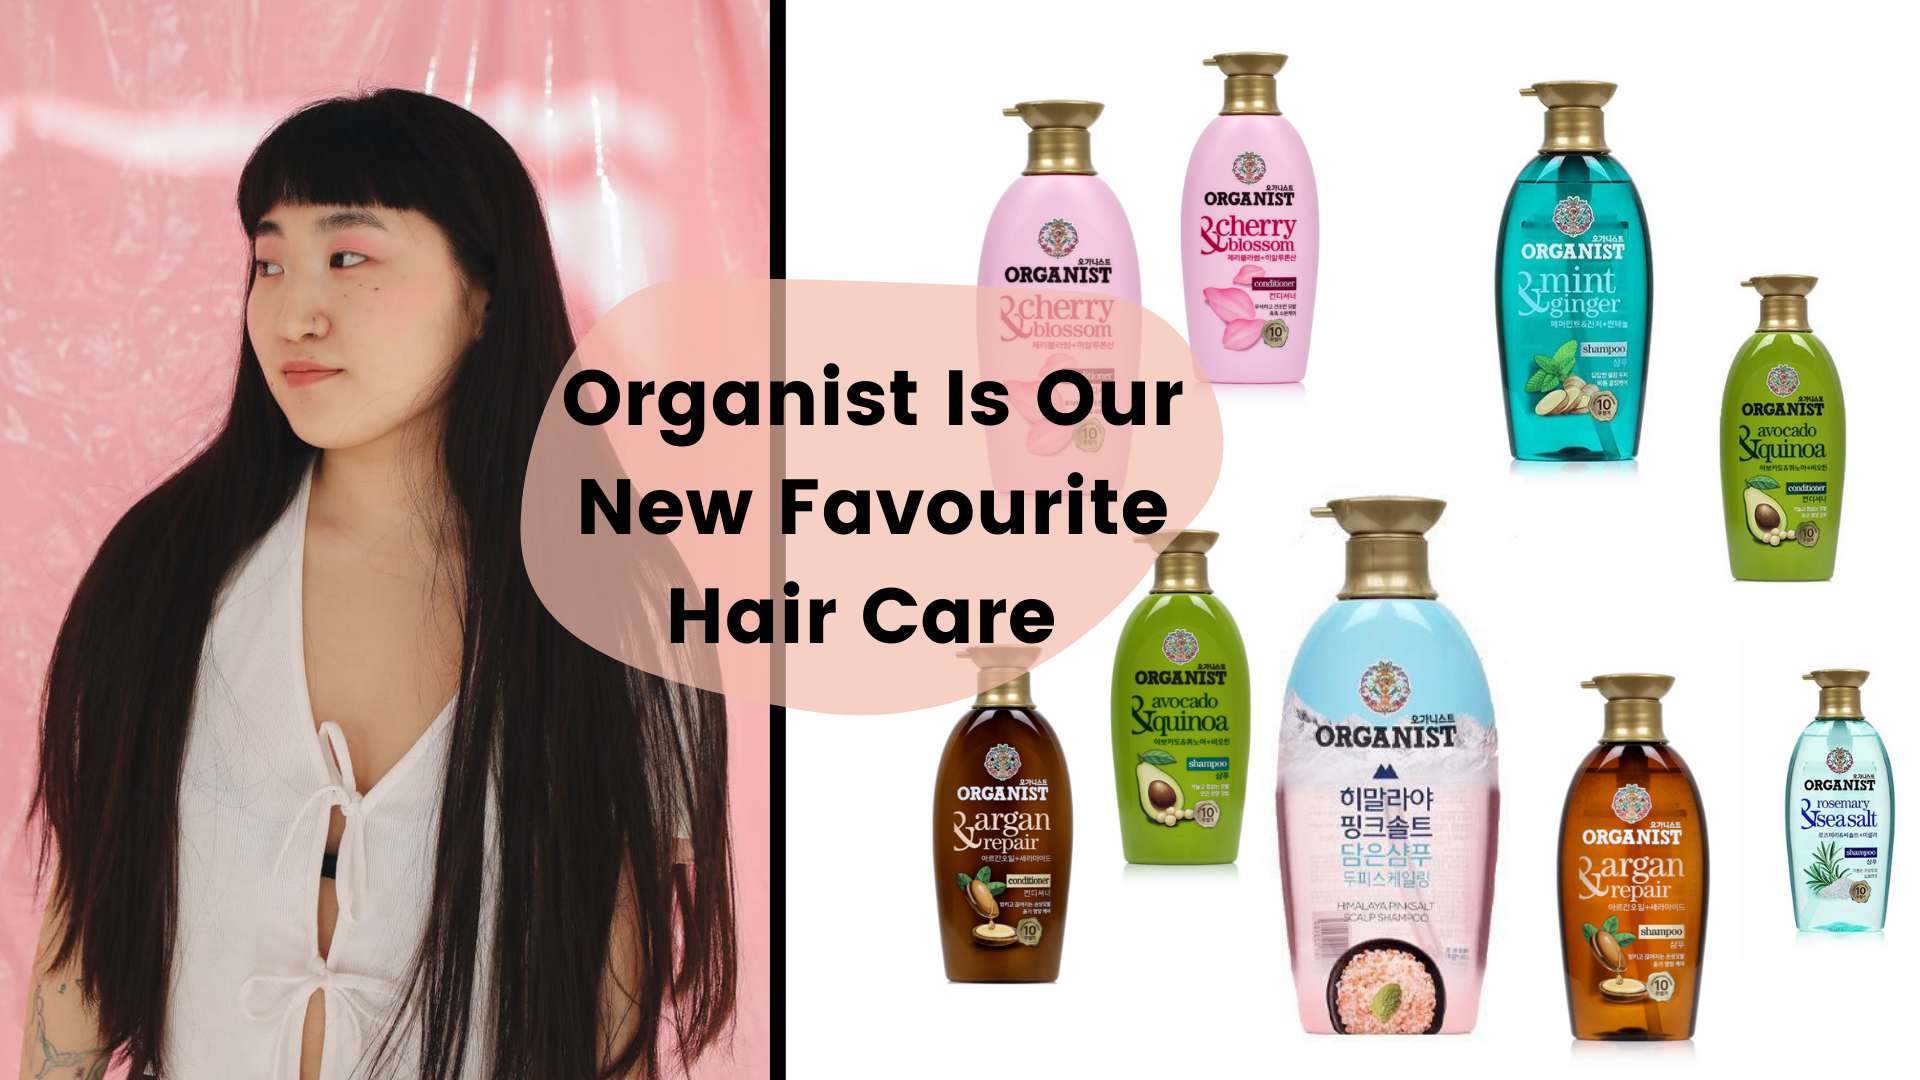 Get Organic Hair Care With The K-Beauty Brand Organist Shampoo